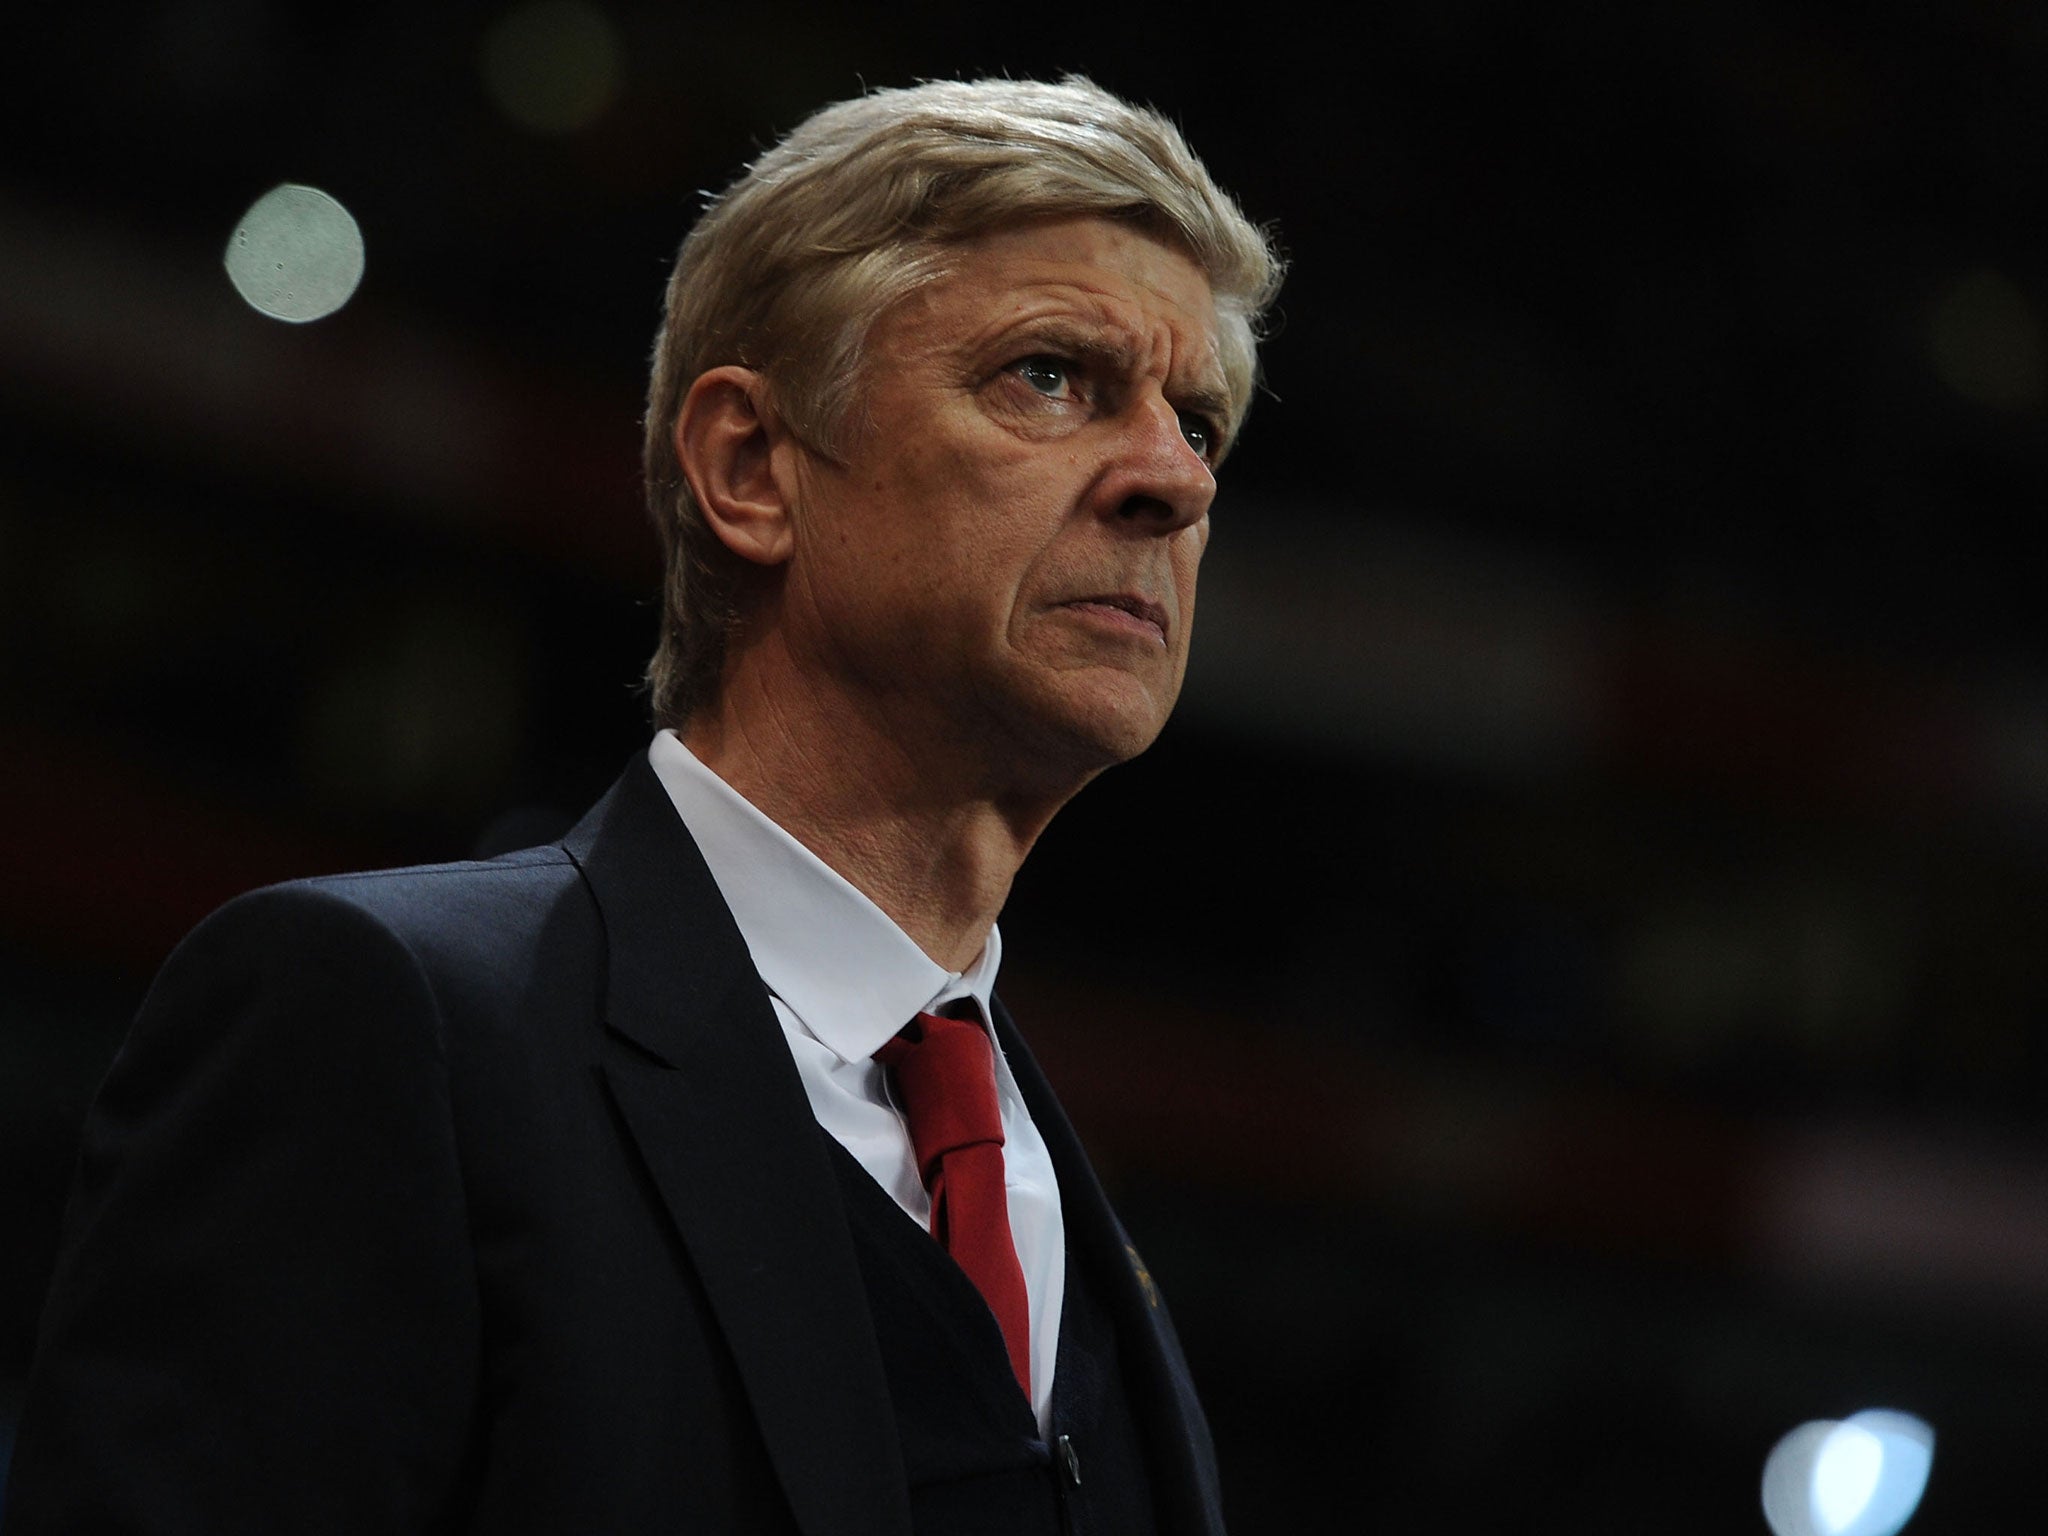 Arsene Wenger looks on from the sidelines during the 2-0 defeat by Bayern Munich